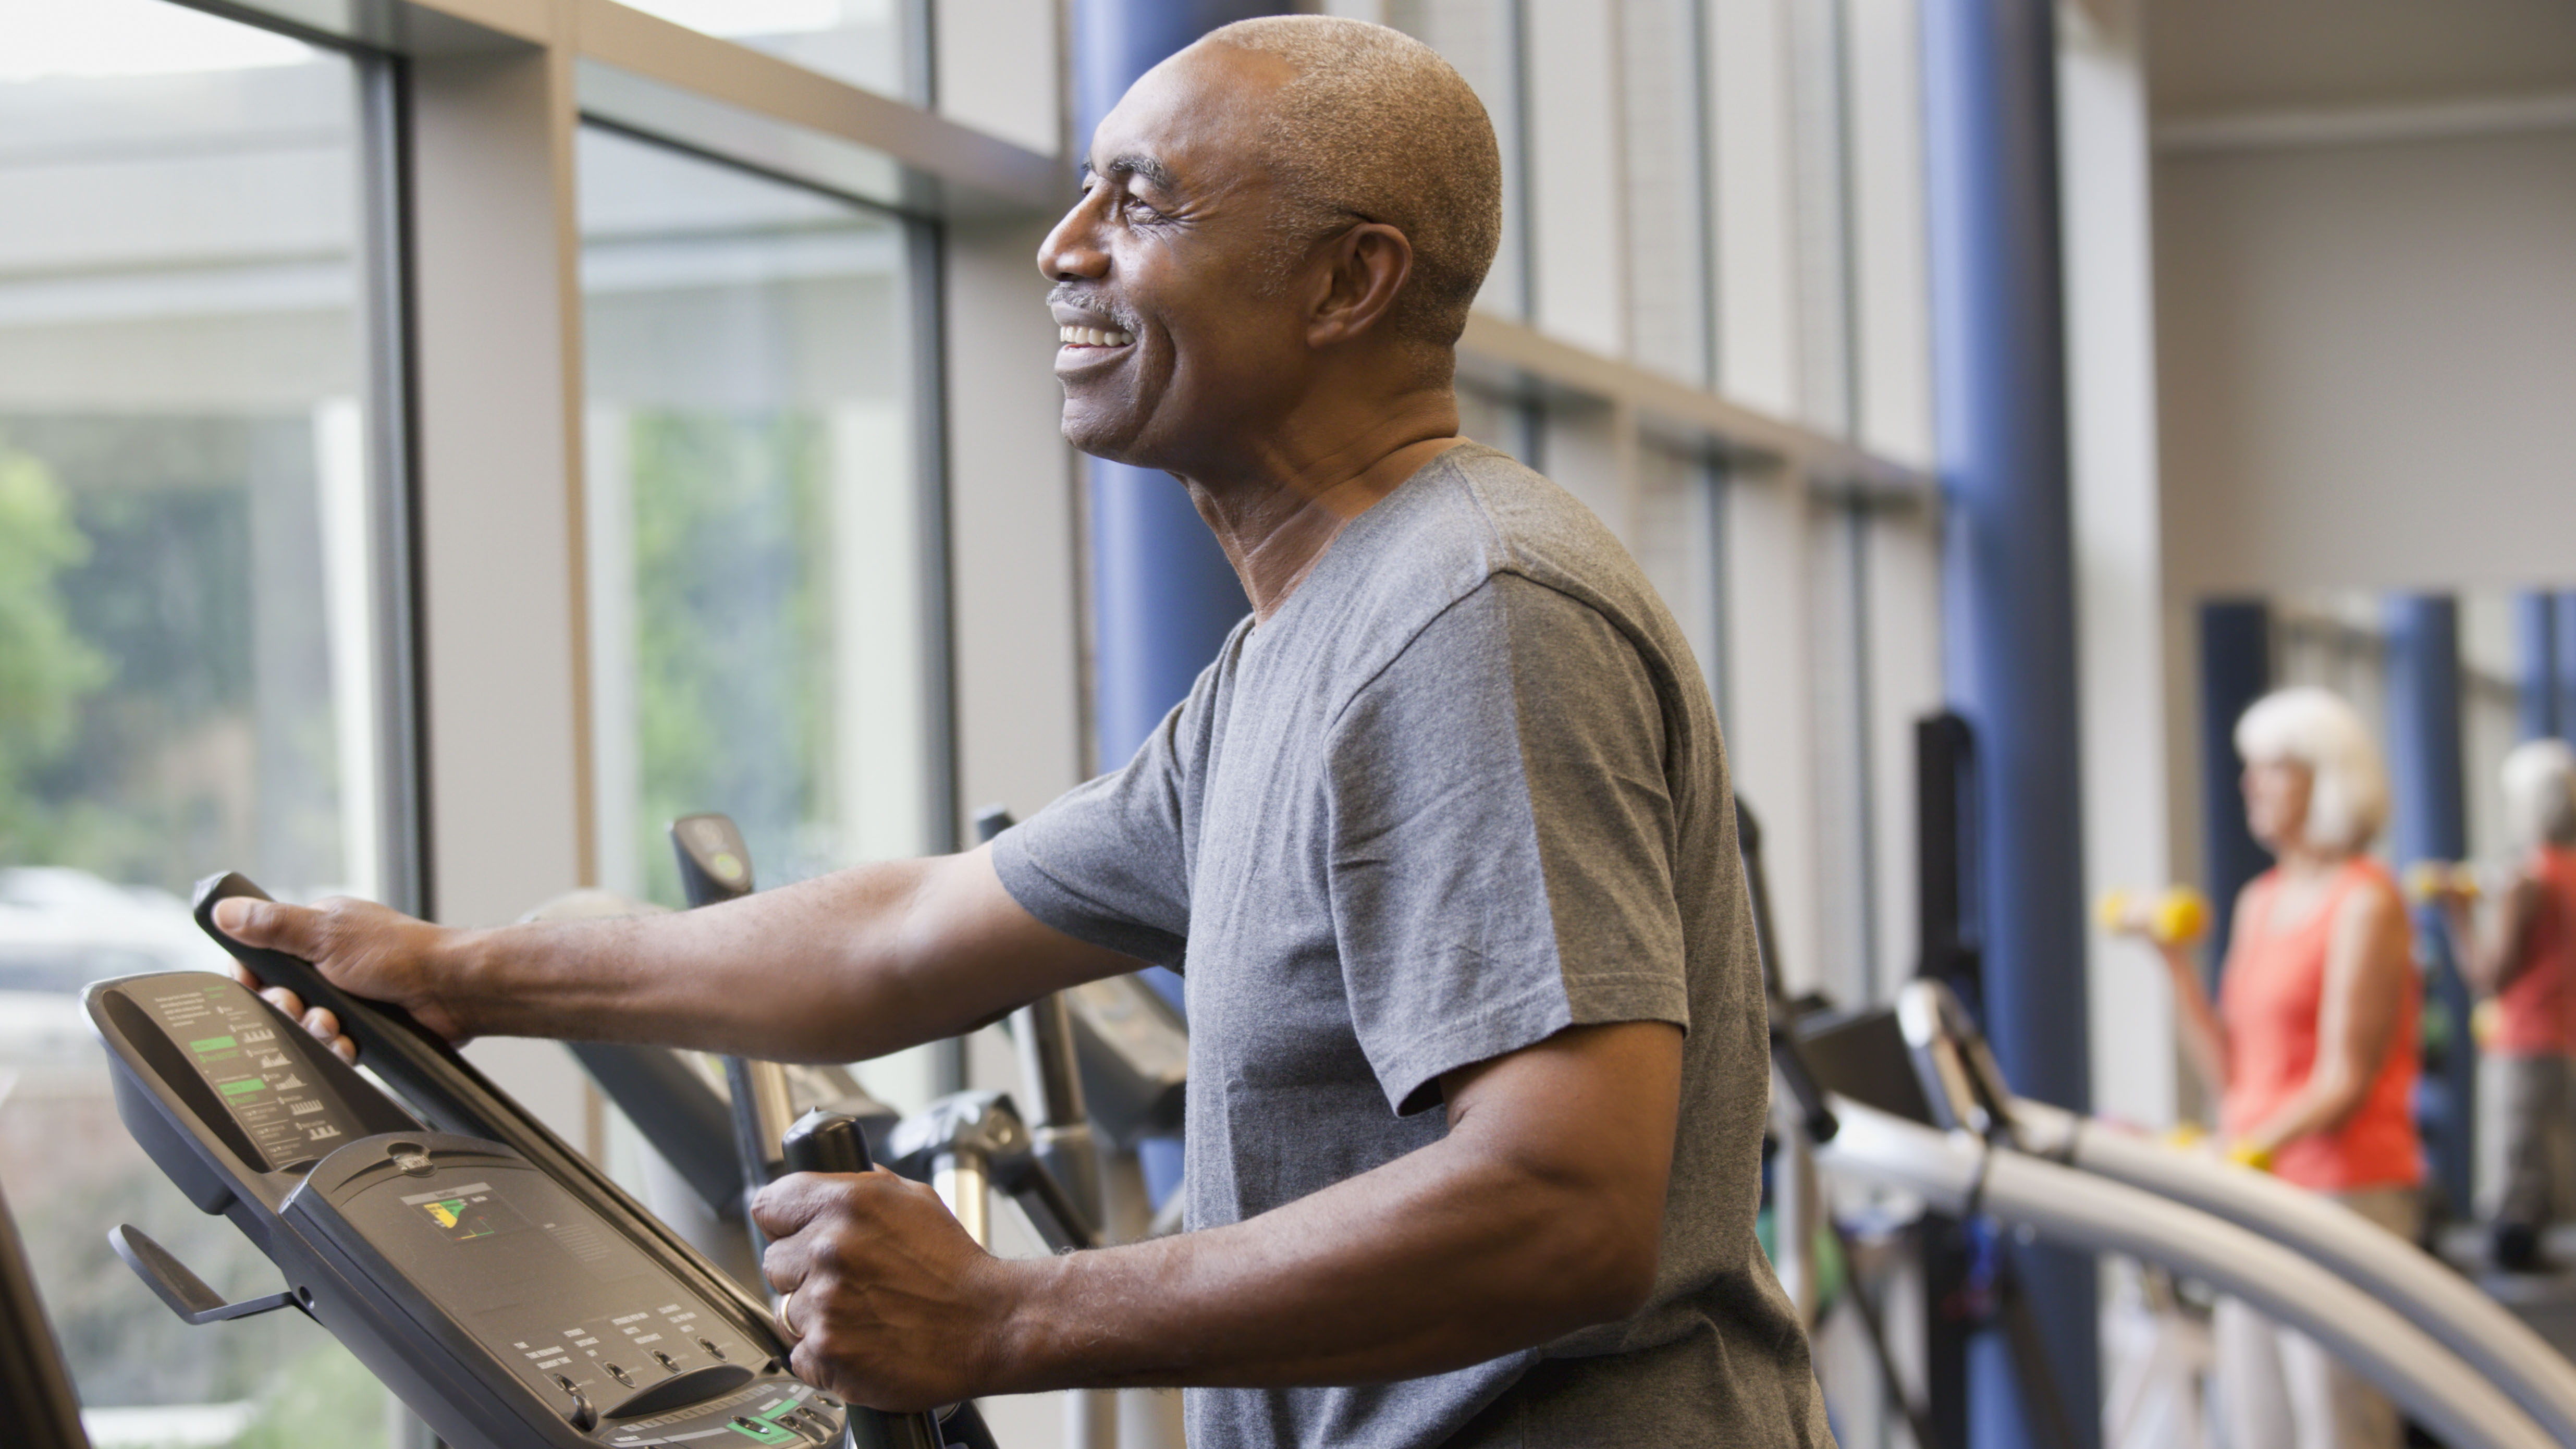 Man working out on elliptical machine